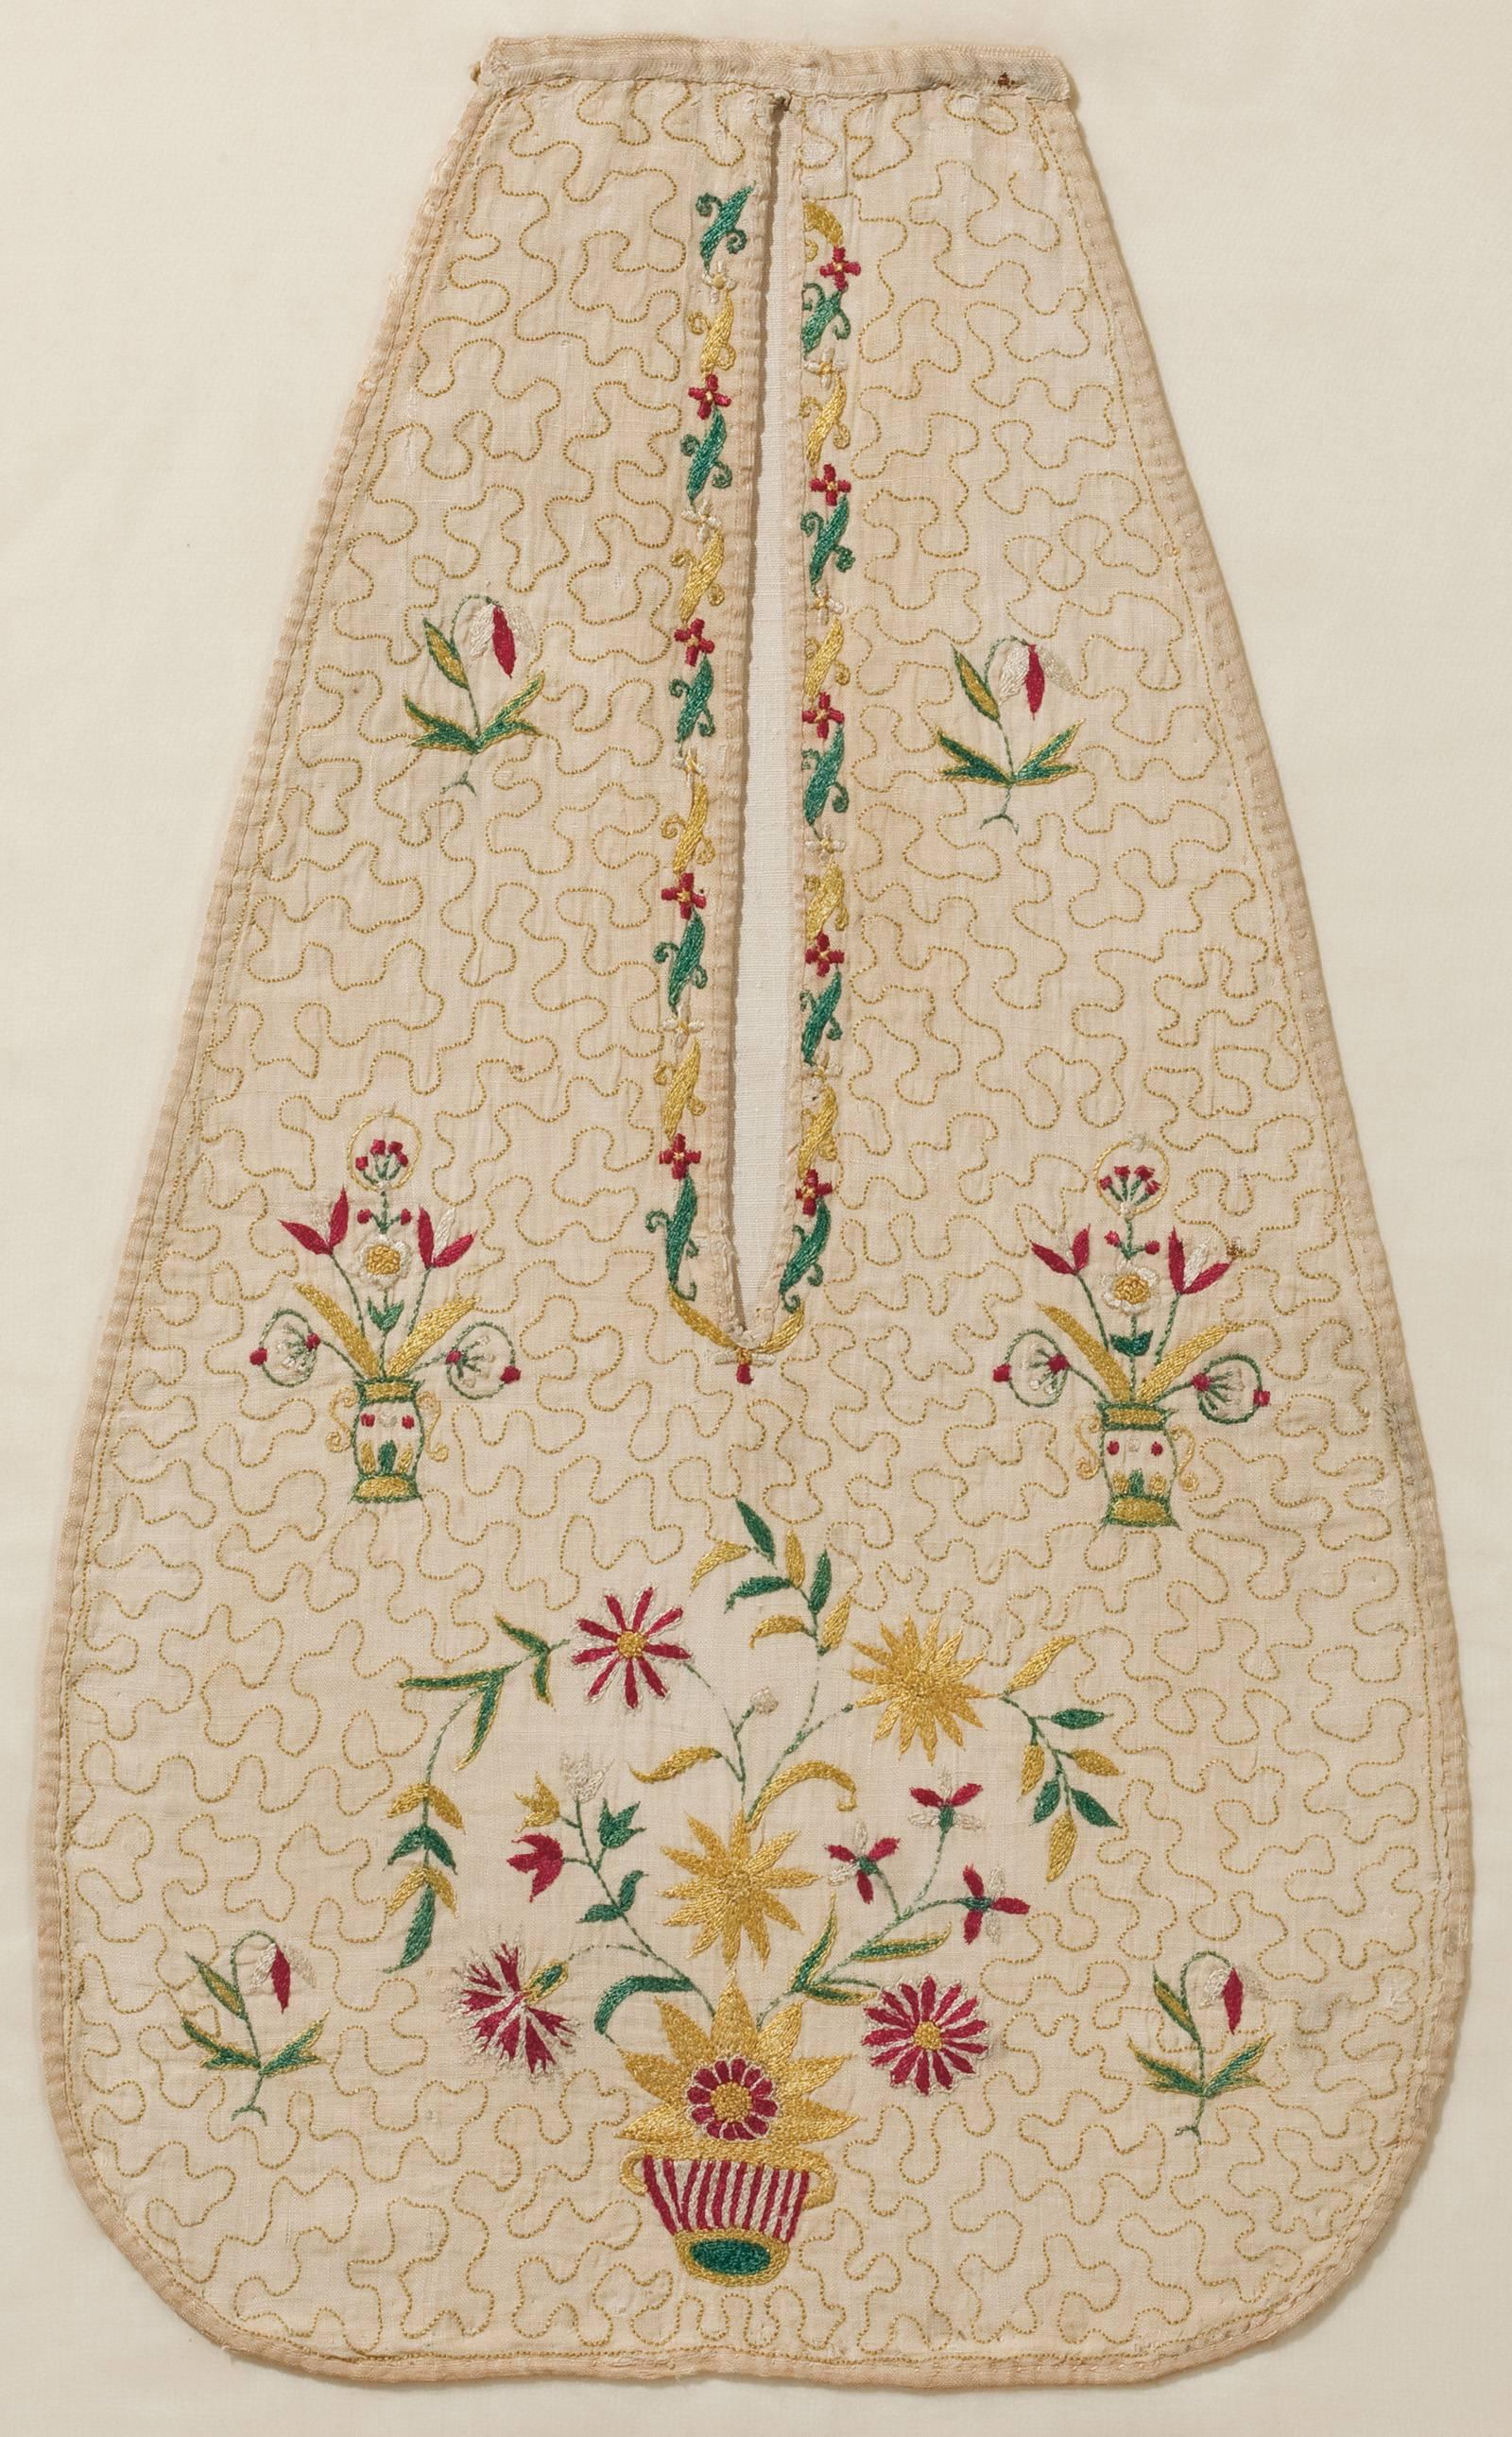 This beautifully embroidered English pocket would have been functional as well as decorative, and was likely worked by its owner. The polychrome needlework features a striped, two-handled basket filled with large blossom flowers on delicate, leafy